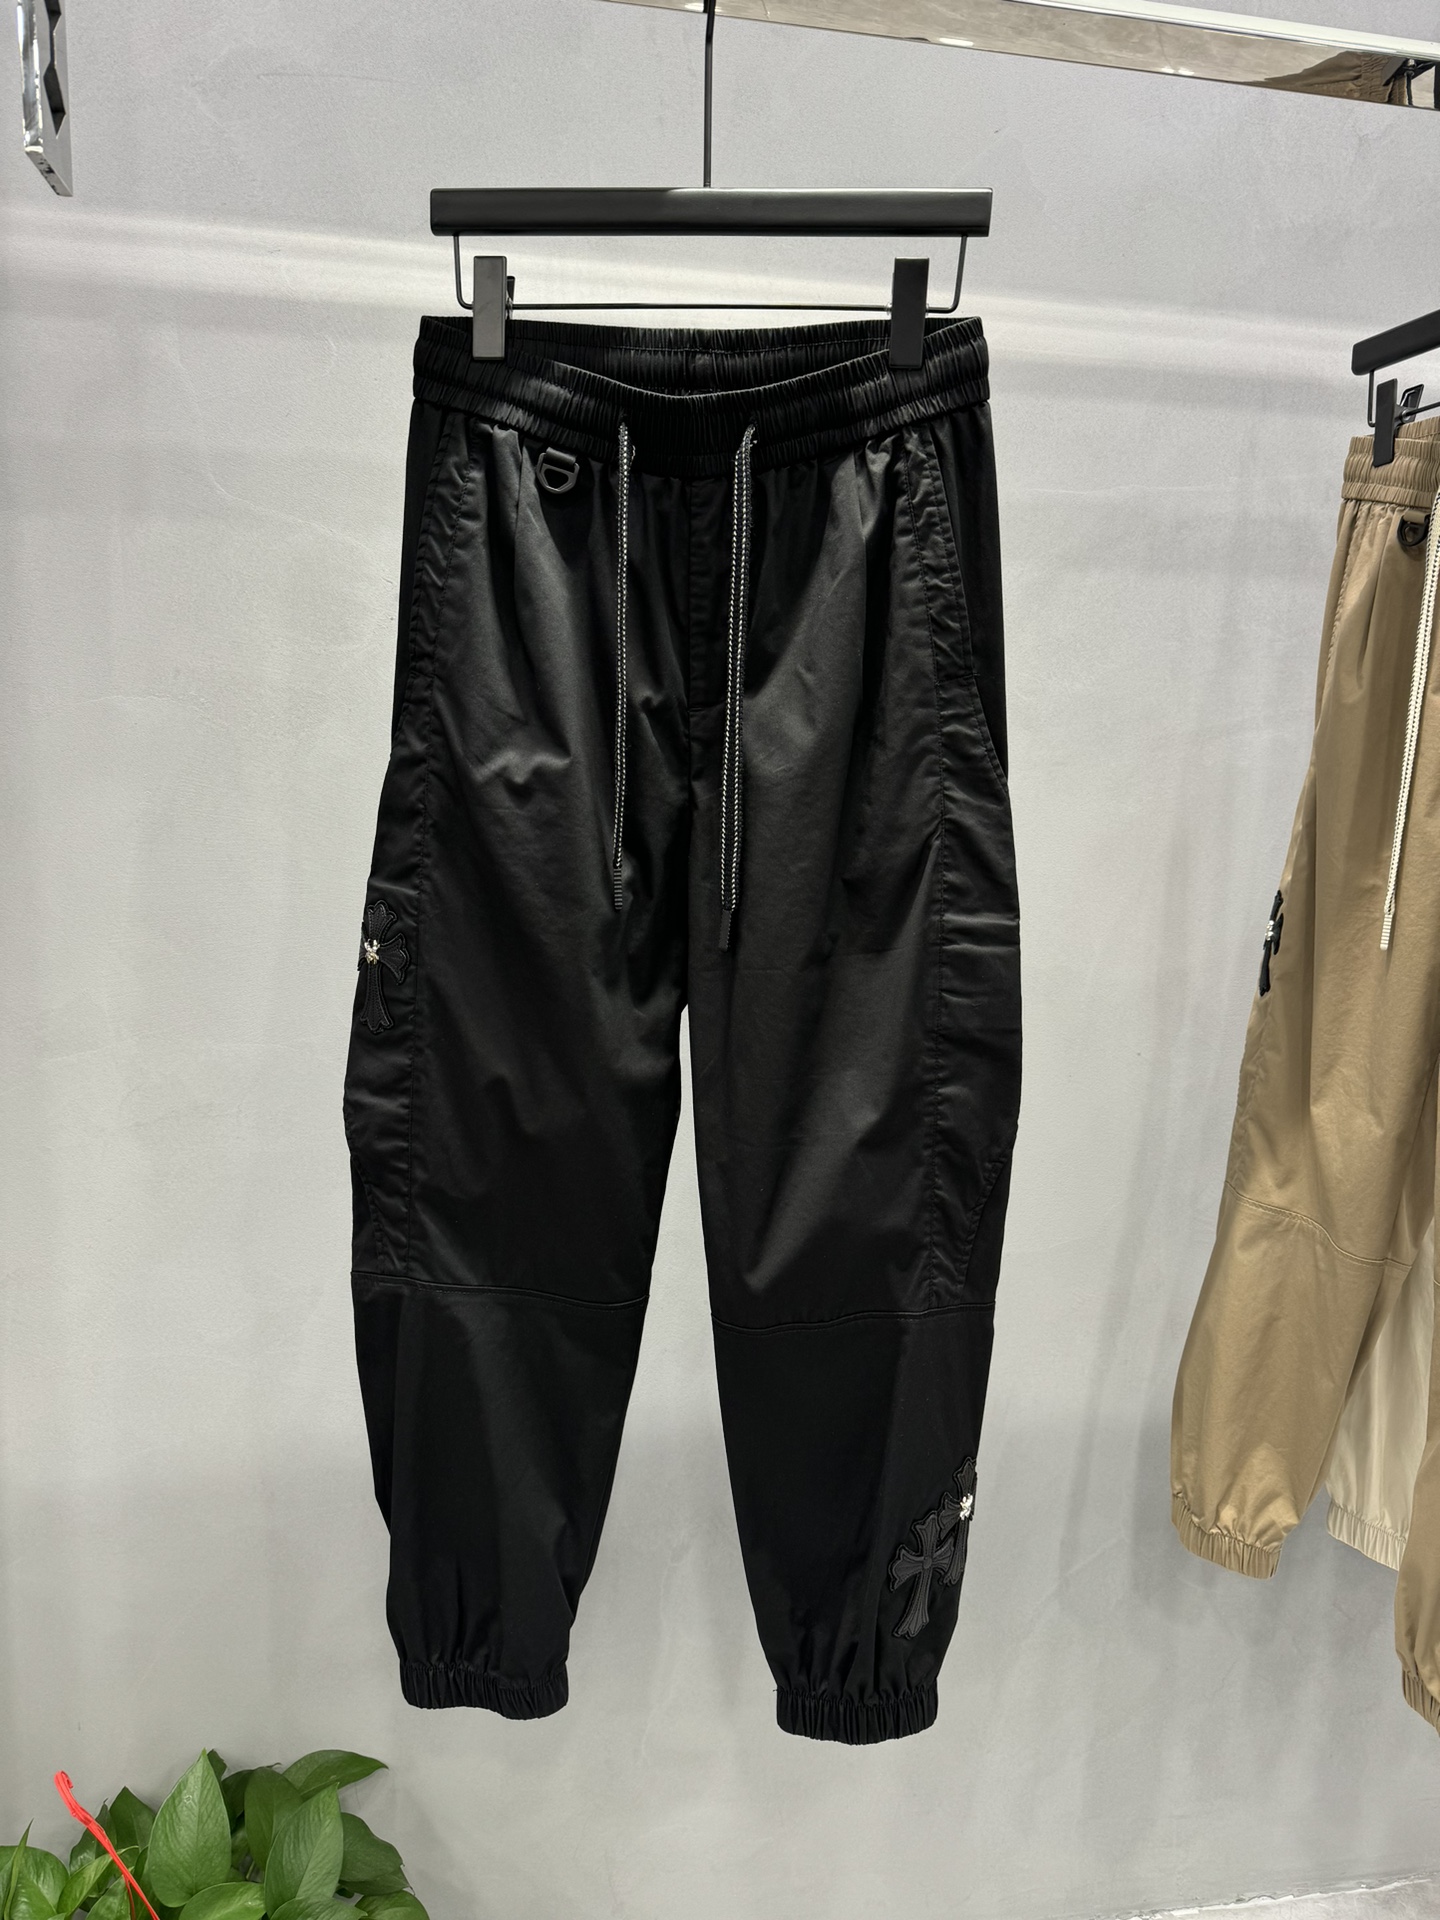 Chrome Hearts Clothing Pants & Trousers Luxury Cheap
 Beige Black Khaki White Embroidery Calfskin Cotton Cowhide Casual